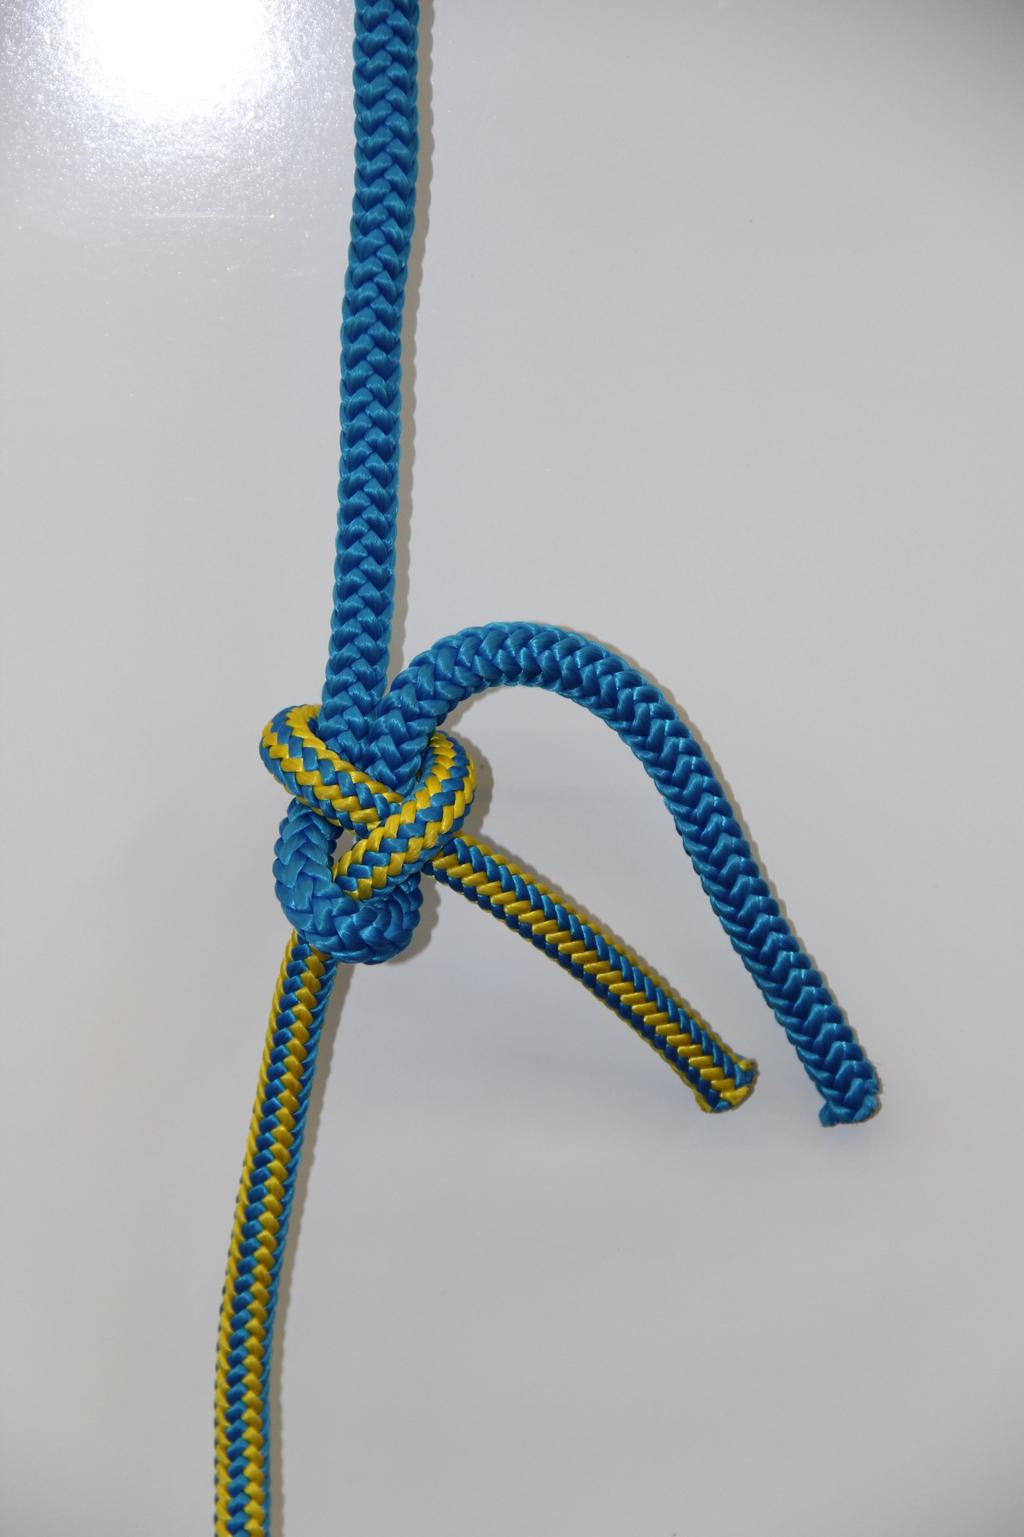 Sheet bend: often used to join two ropes together, in non-critical situations (sending a rigging rope to a climber in the tree).